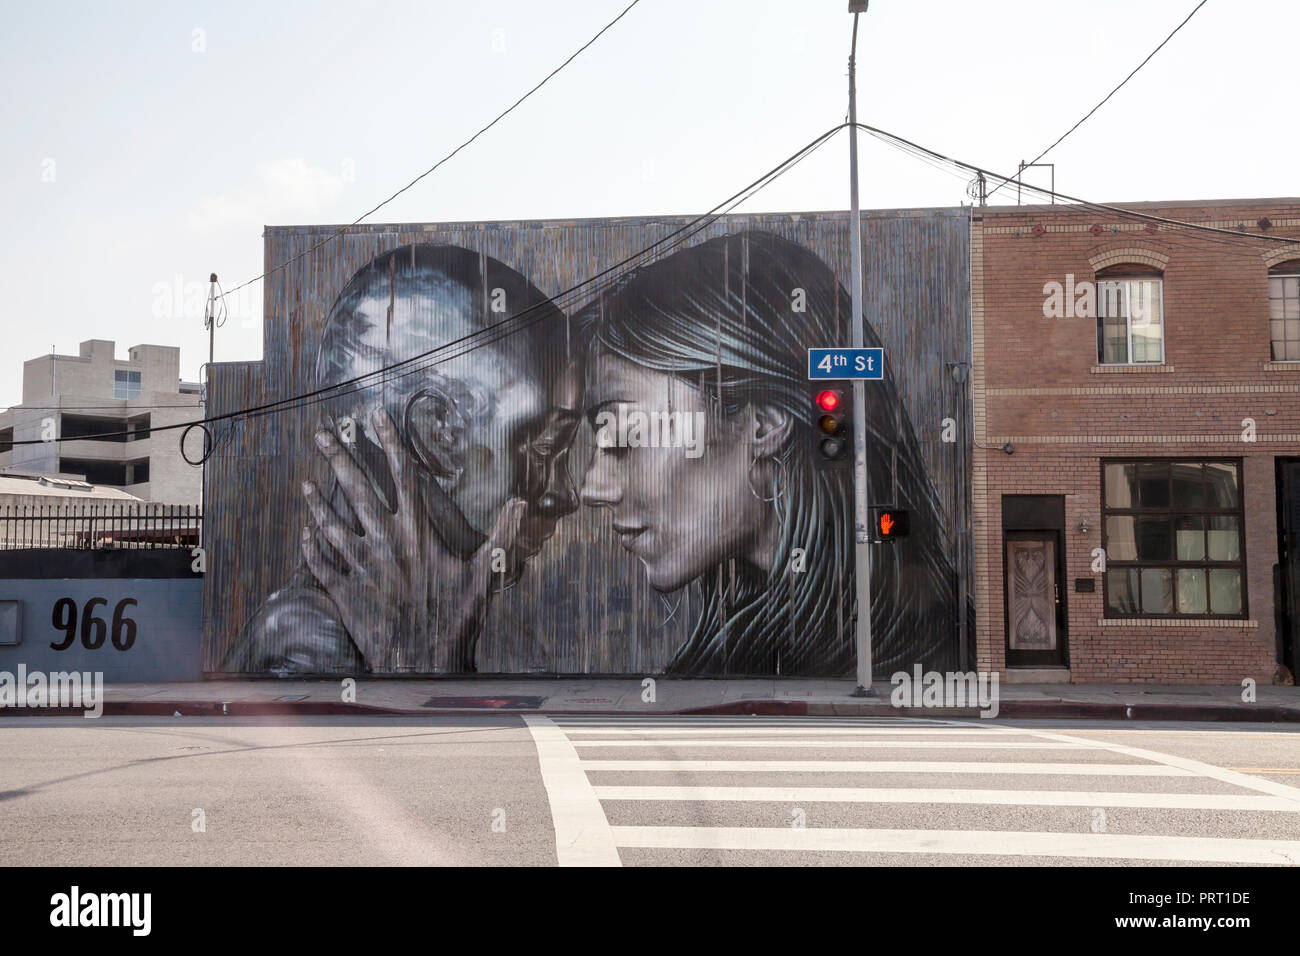 Mural painting in Arts District, Los Angeles, California, USA Stock Photo